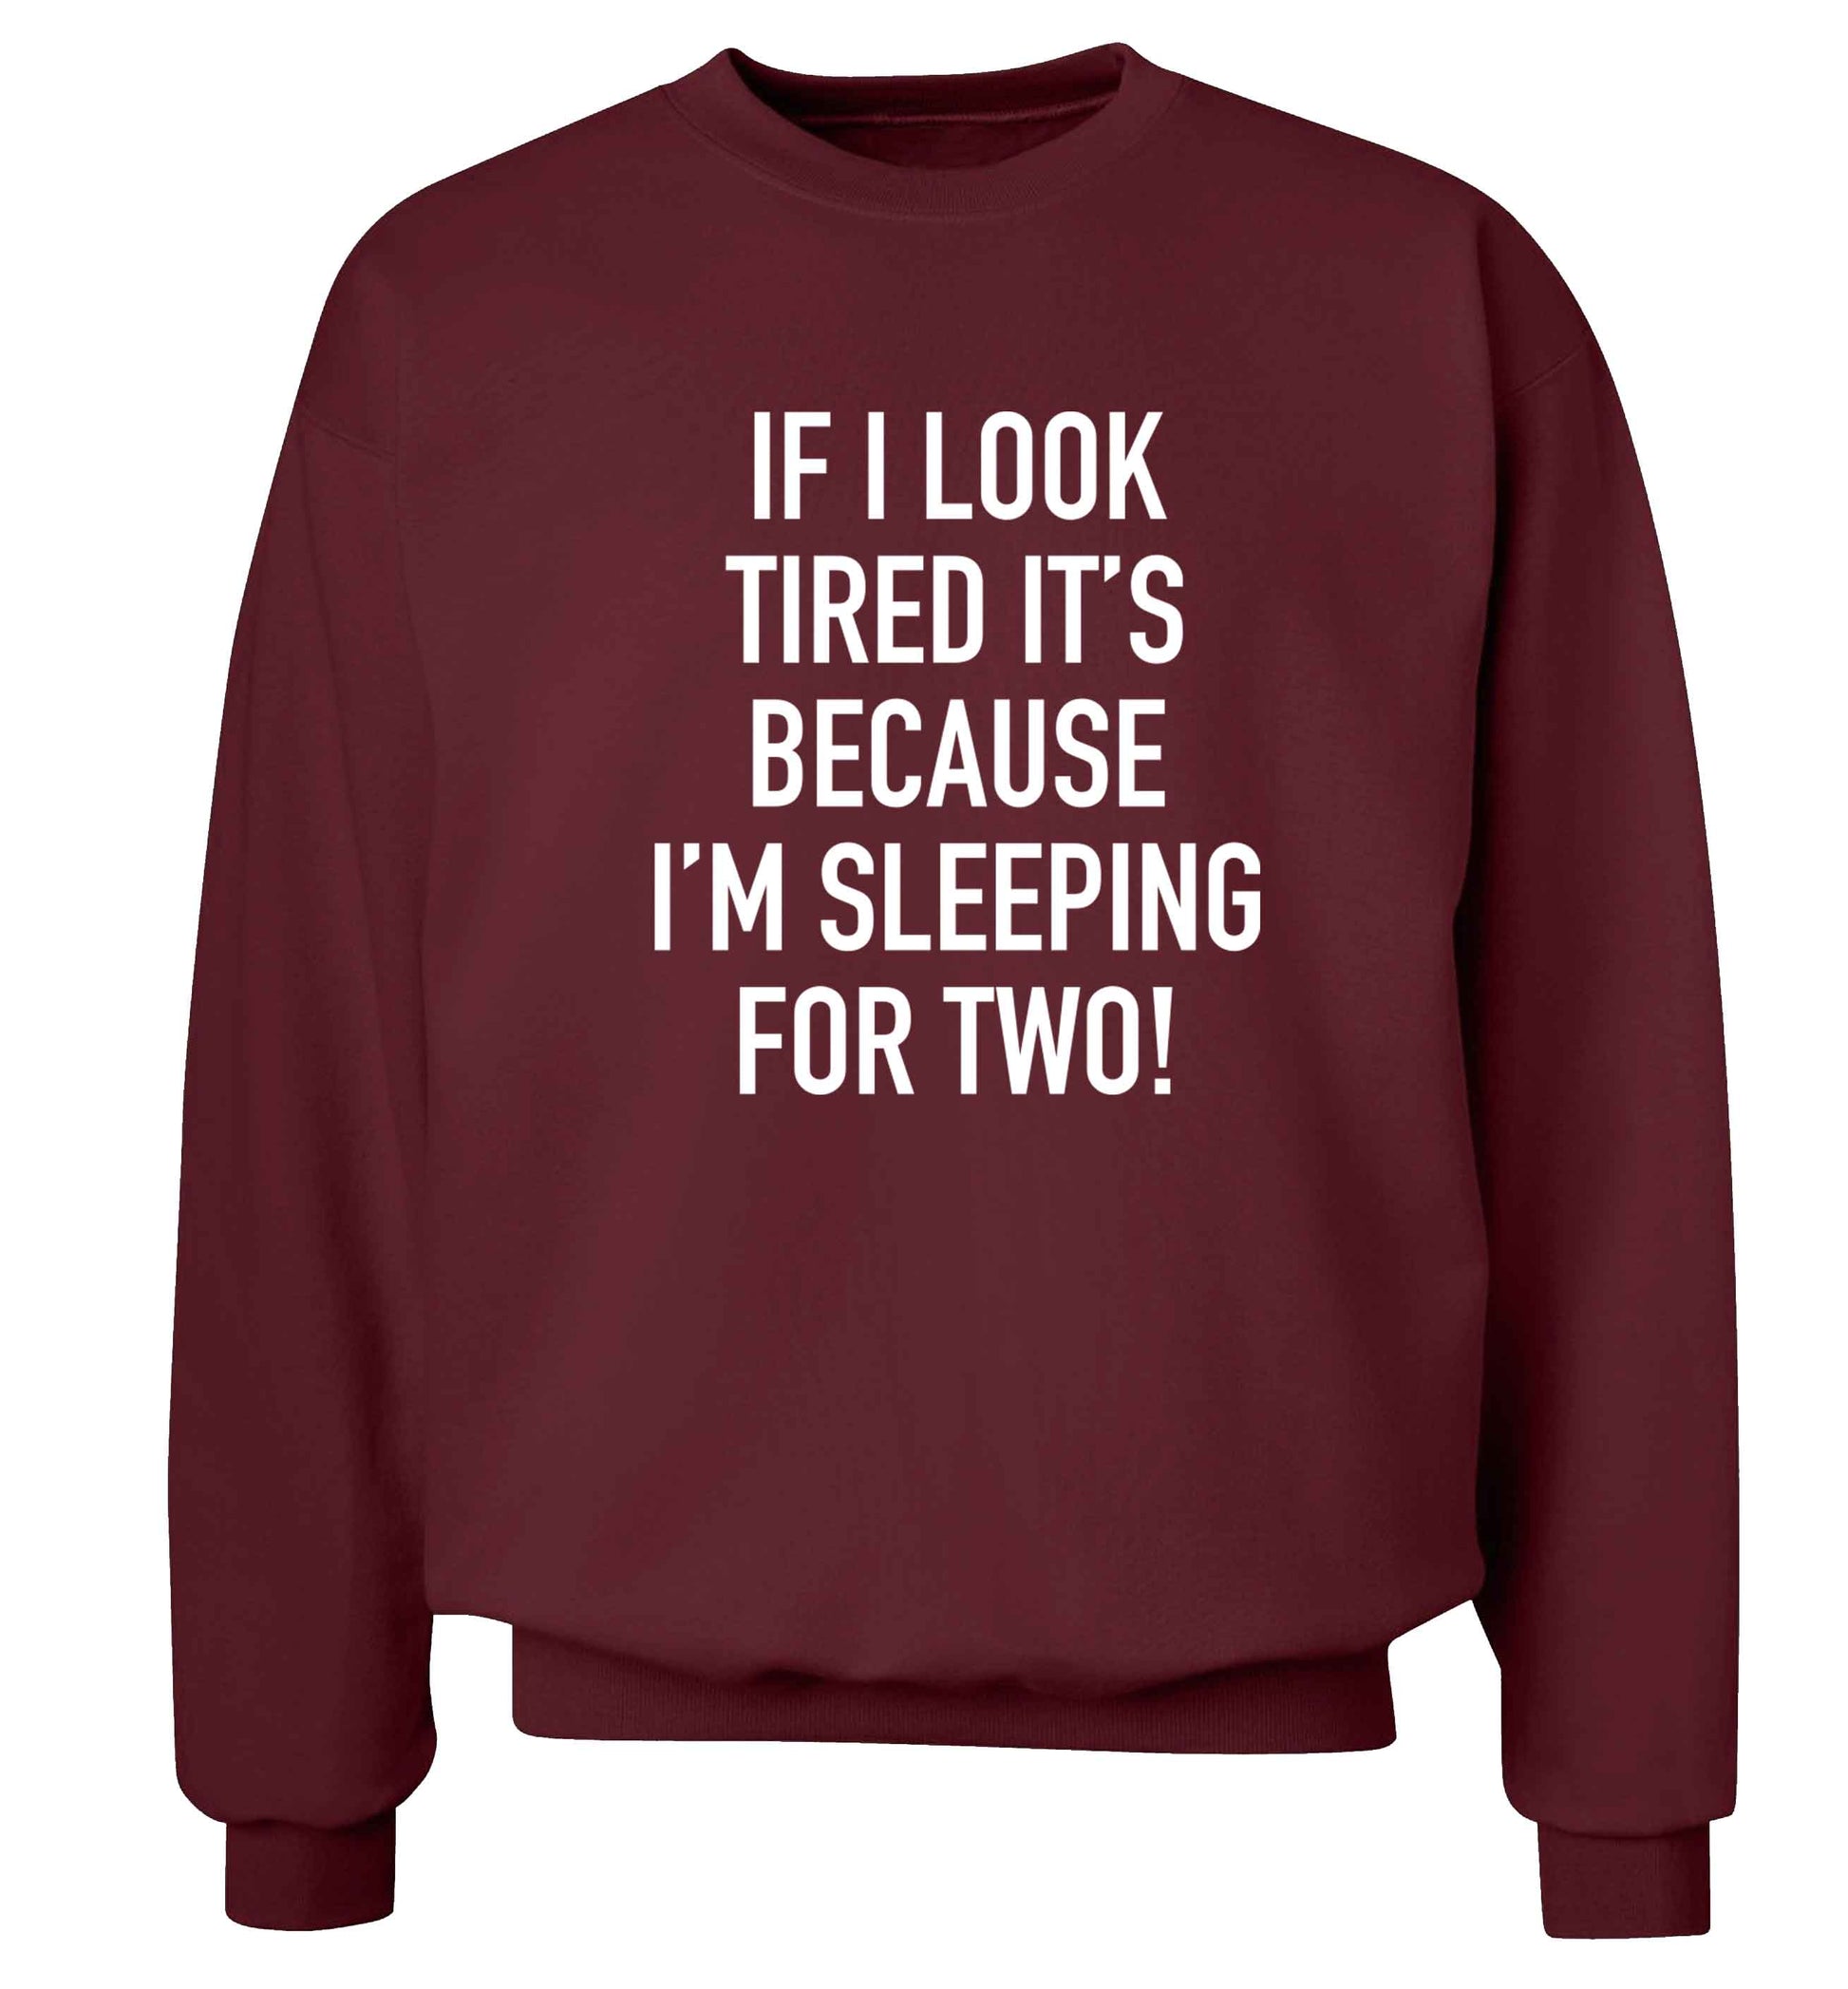 If I look tired it's because I'm sleeping for two Adult's unisex maroon Sweater 2XL